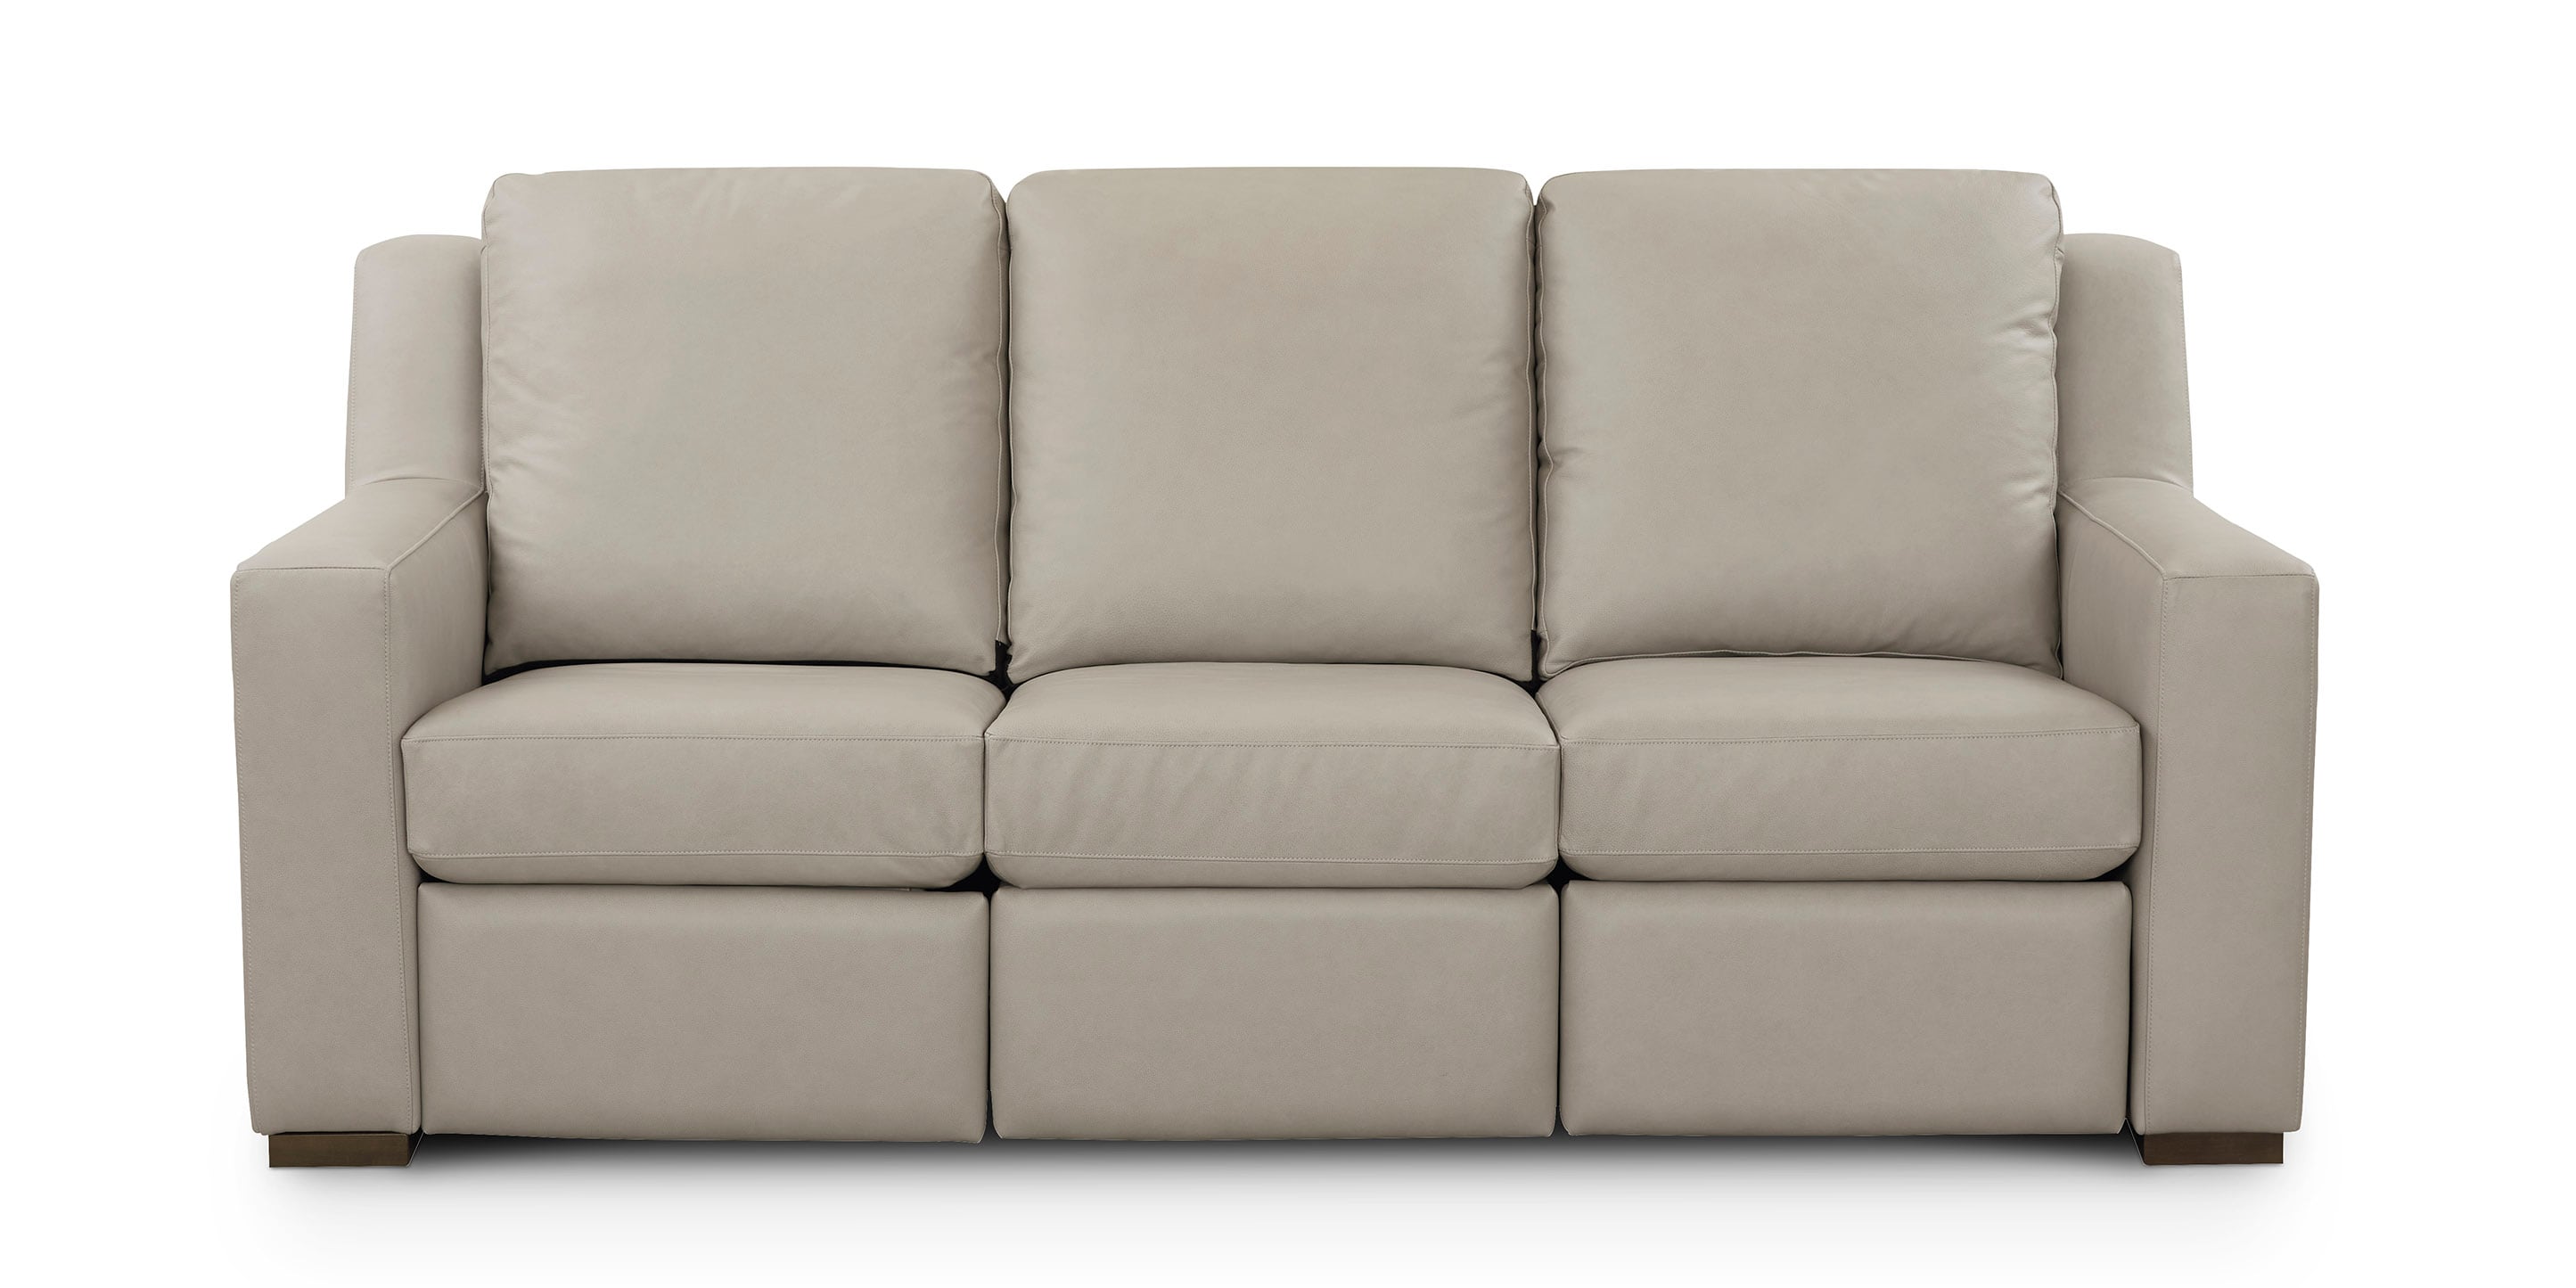 Somers Leather Reclining Sofa